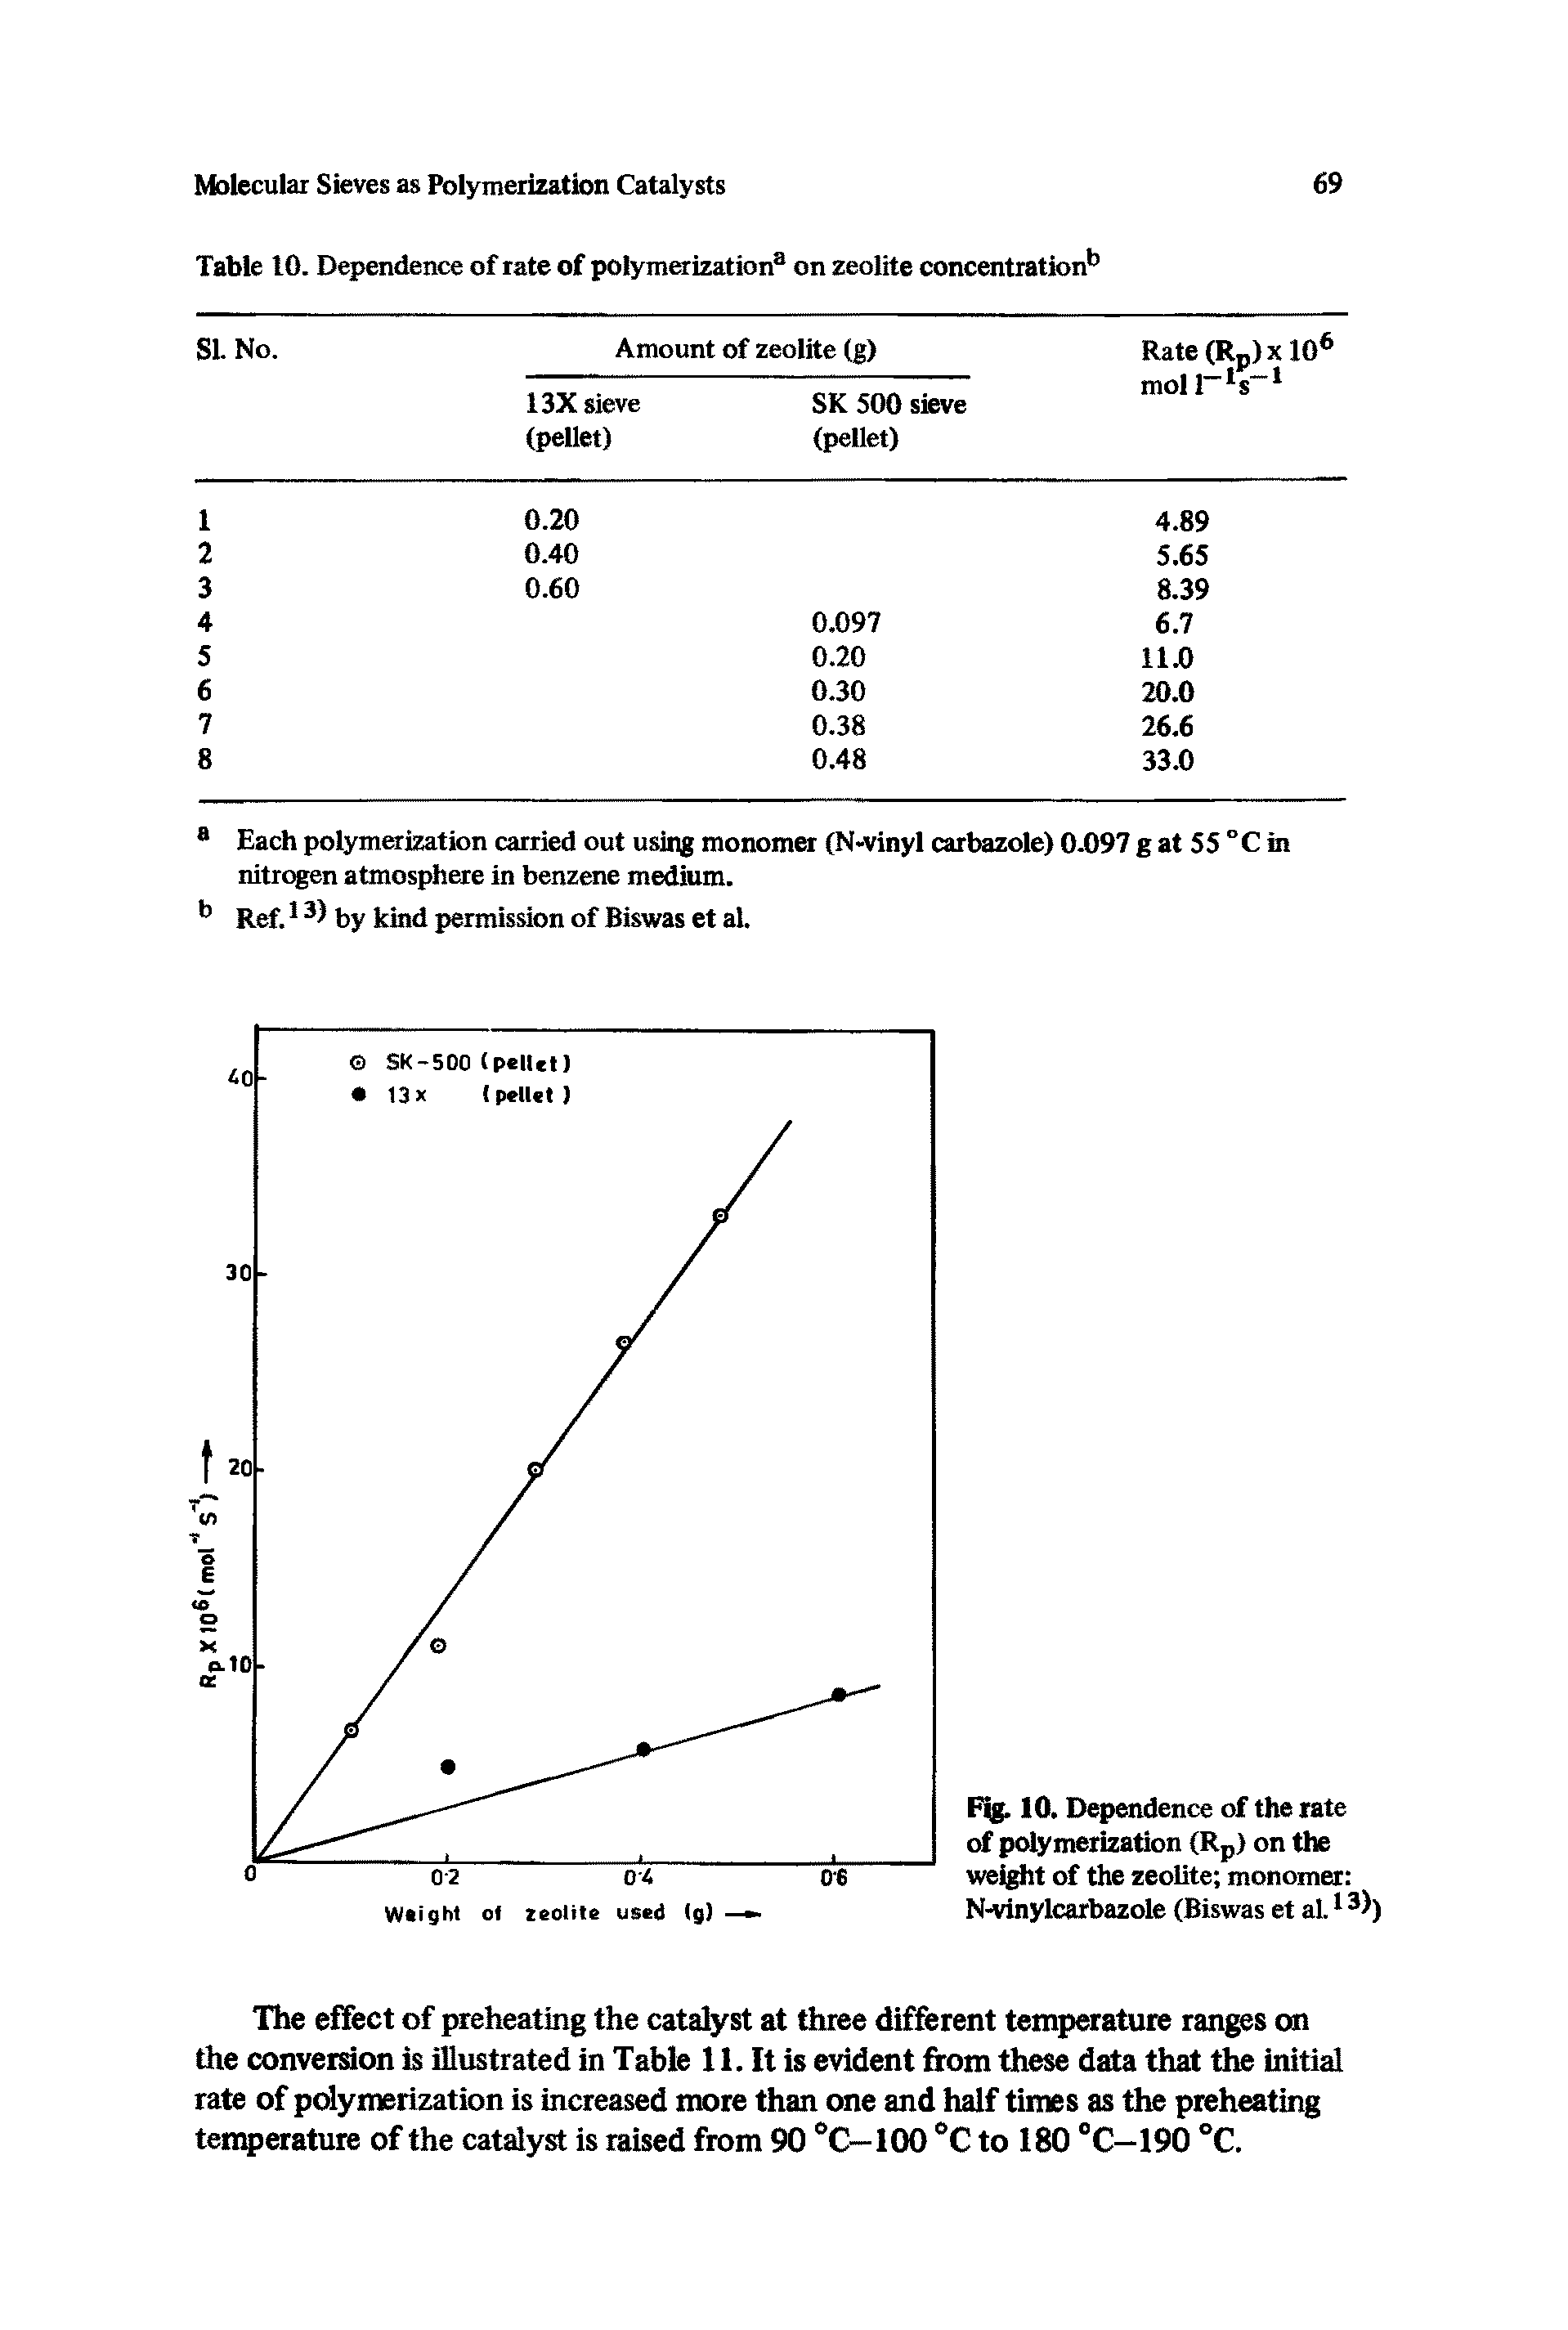 Table 10. Dependence of rate of polymerization on zeolite concentration ...